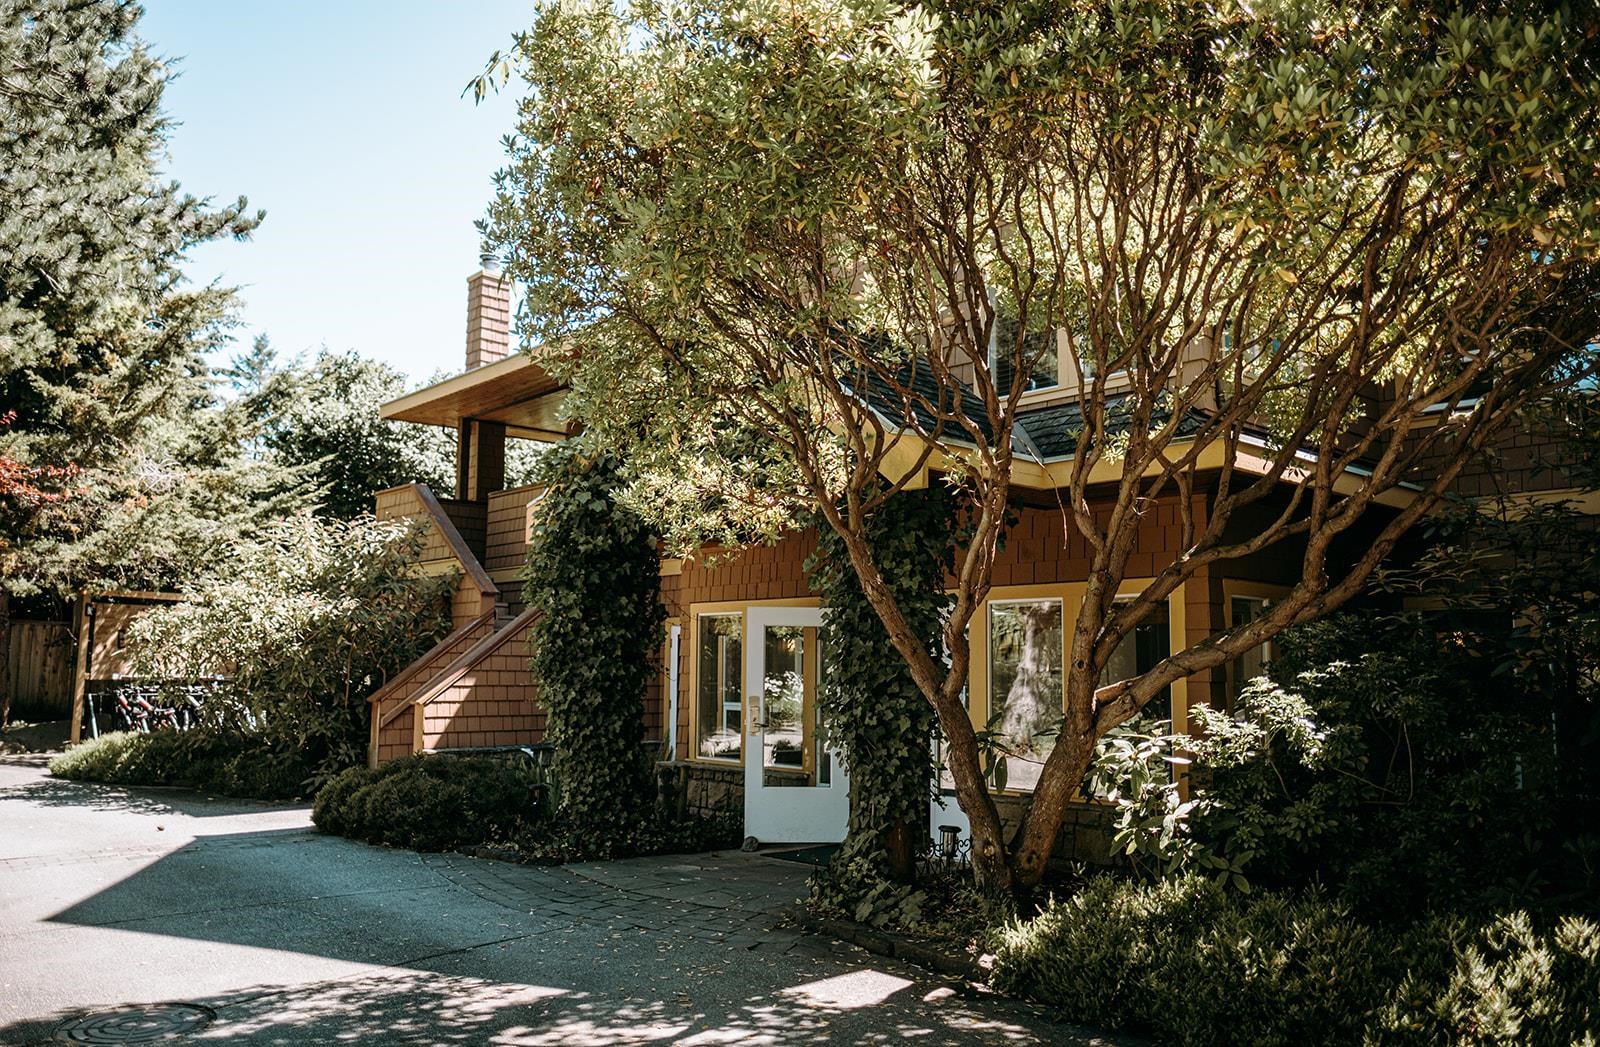 Listing image of 22A 134 MADRONA ROAD